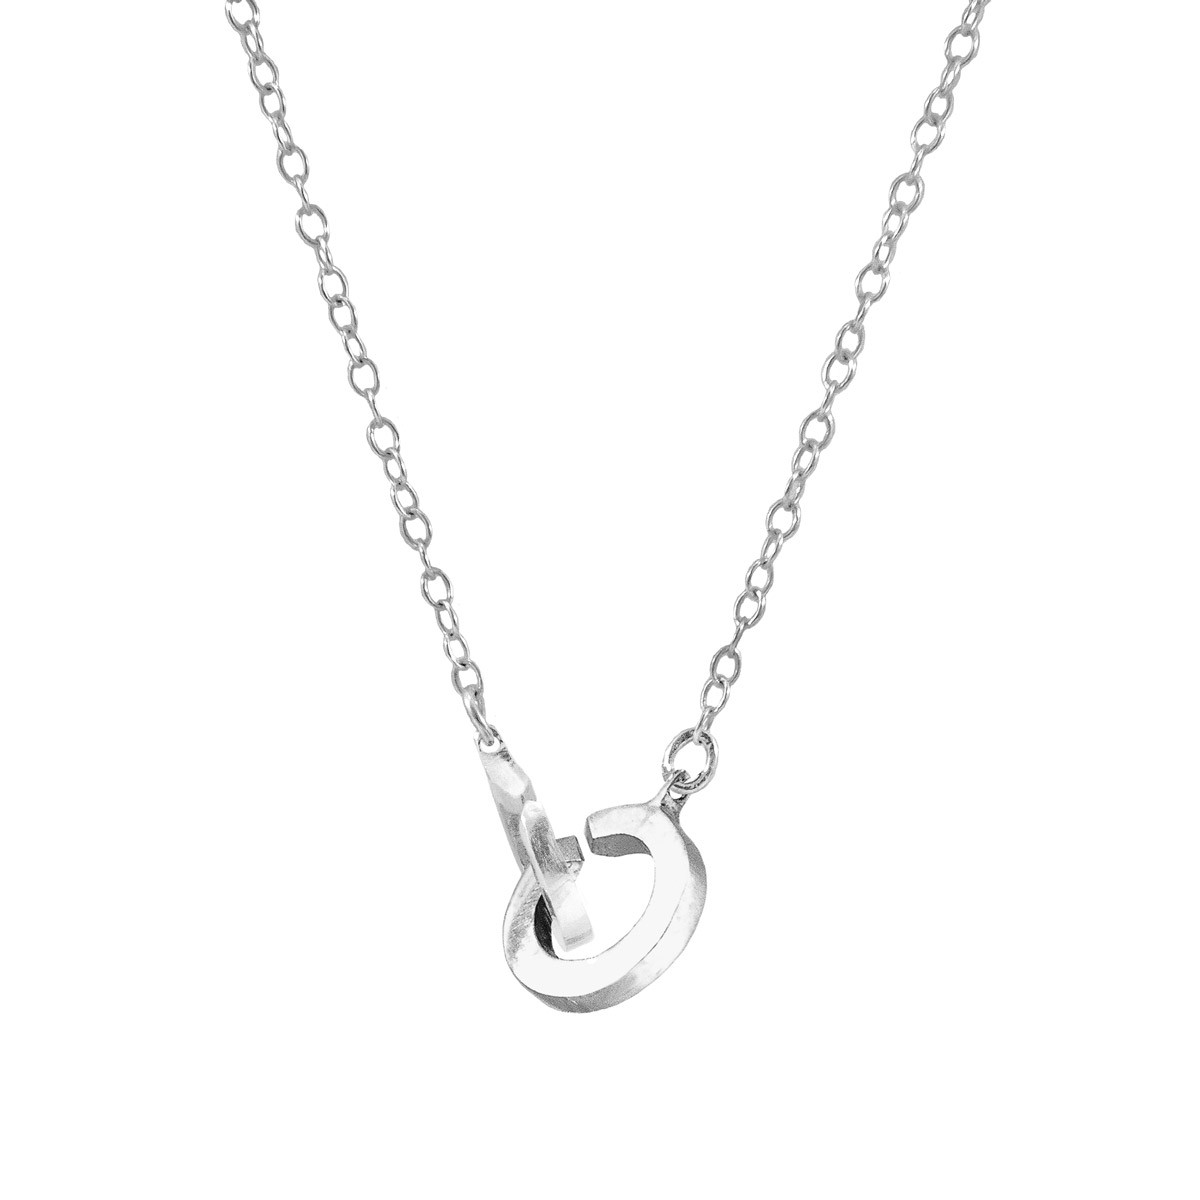 Twin Circle Link Paradise Silver Necklace Pendant